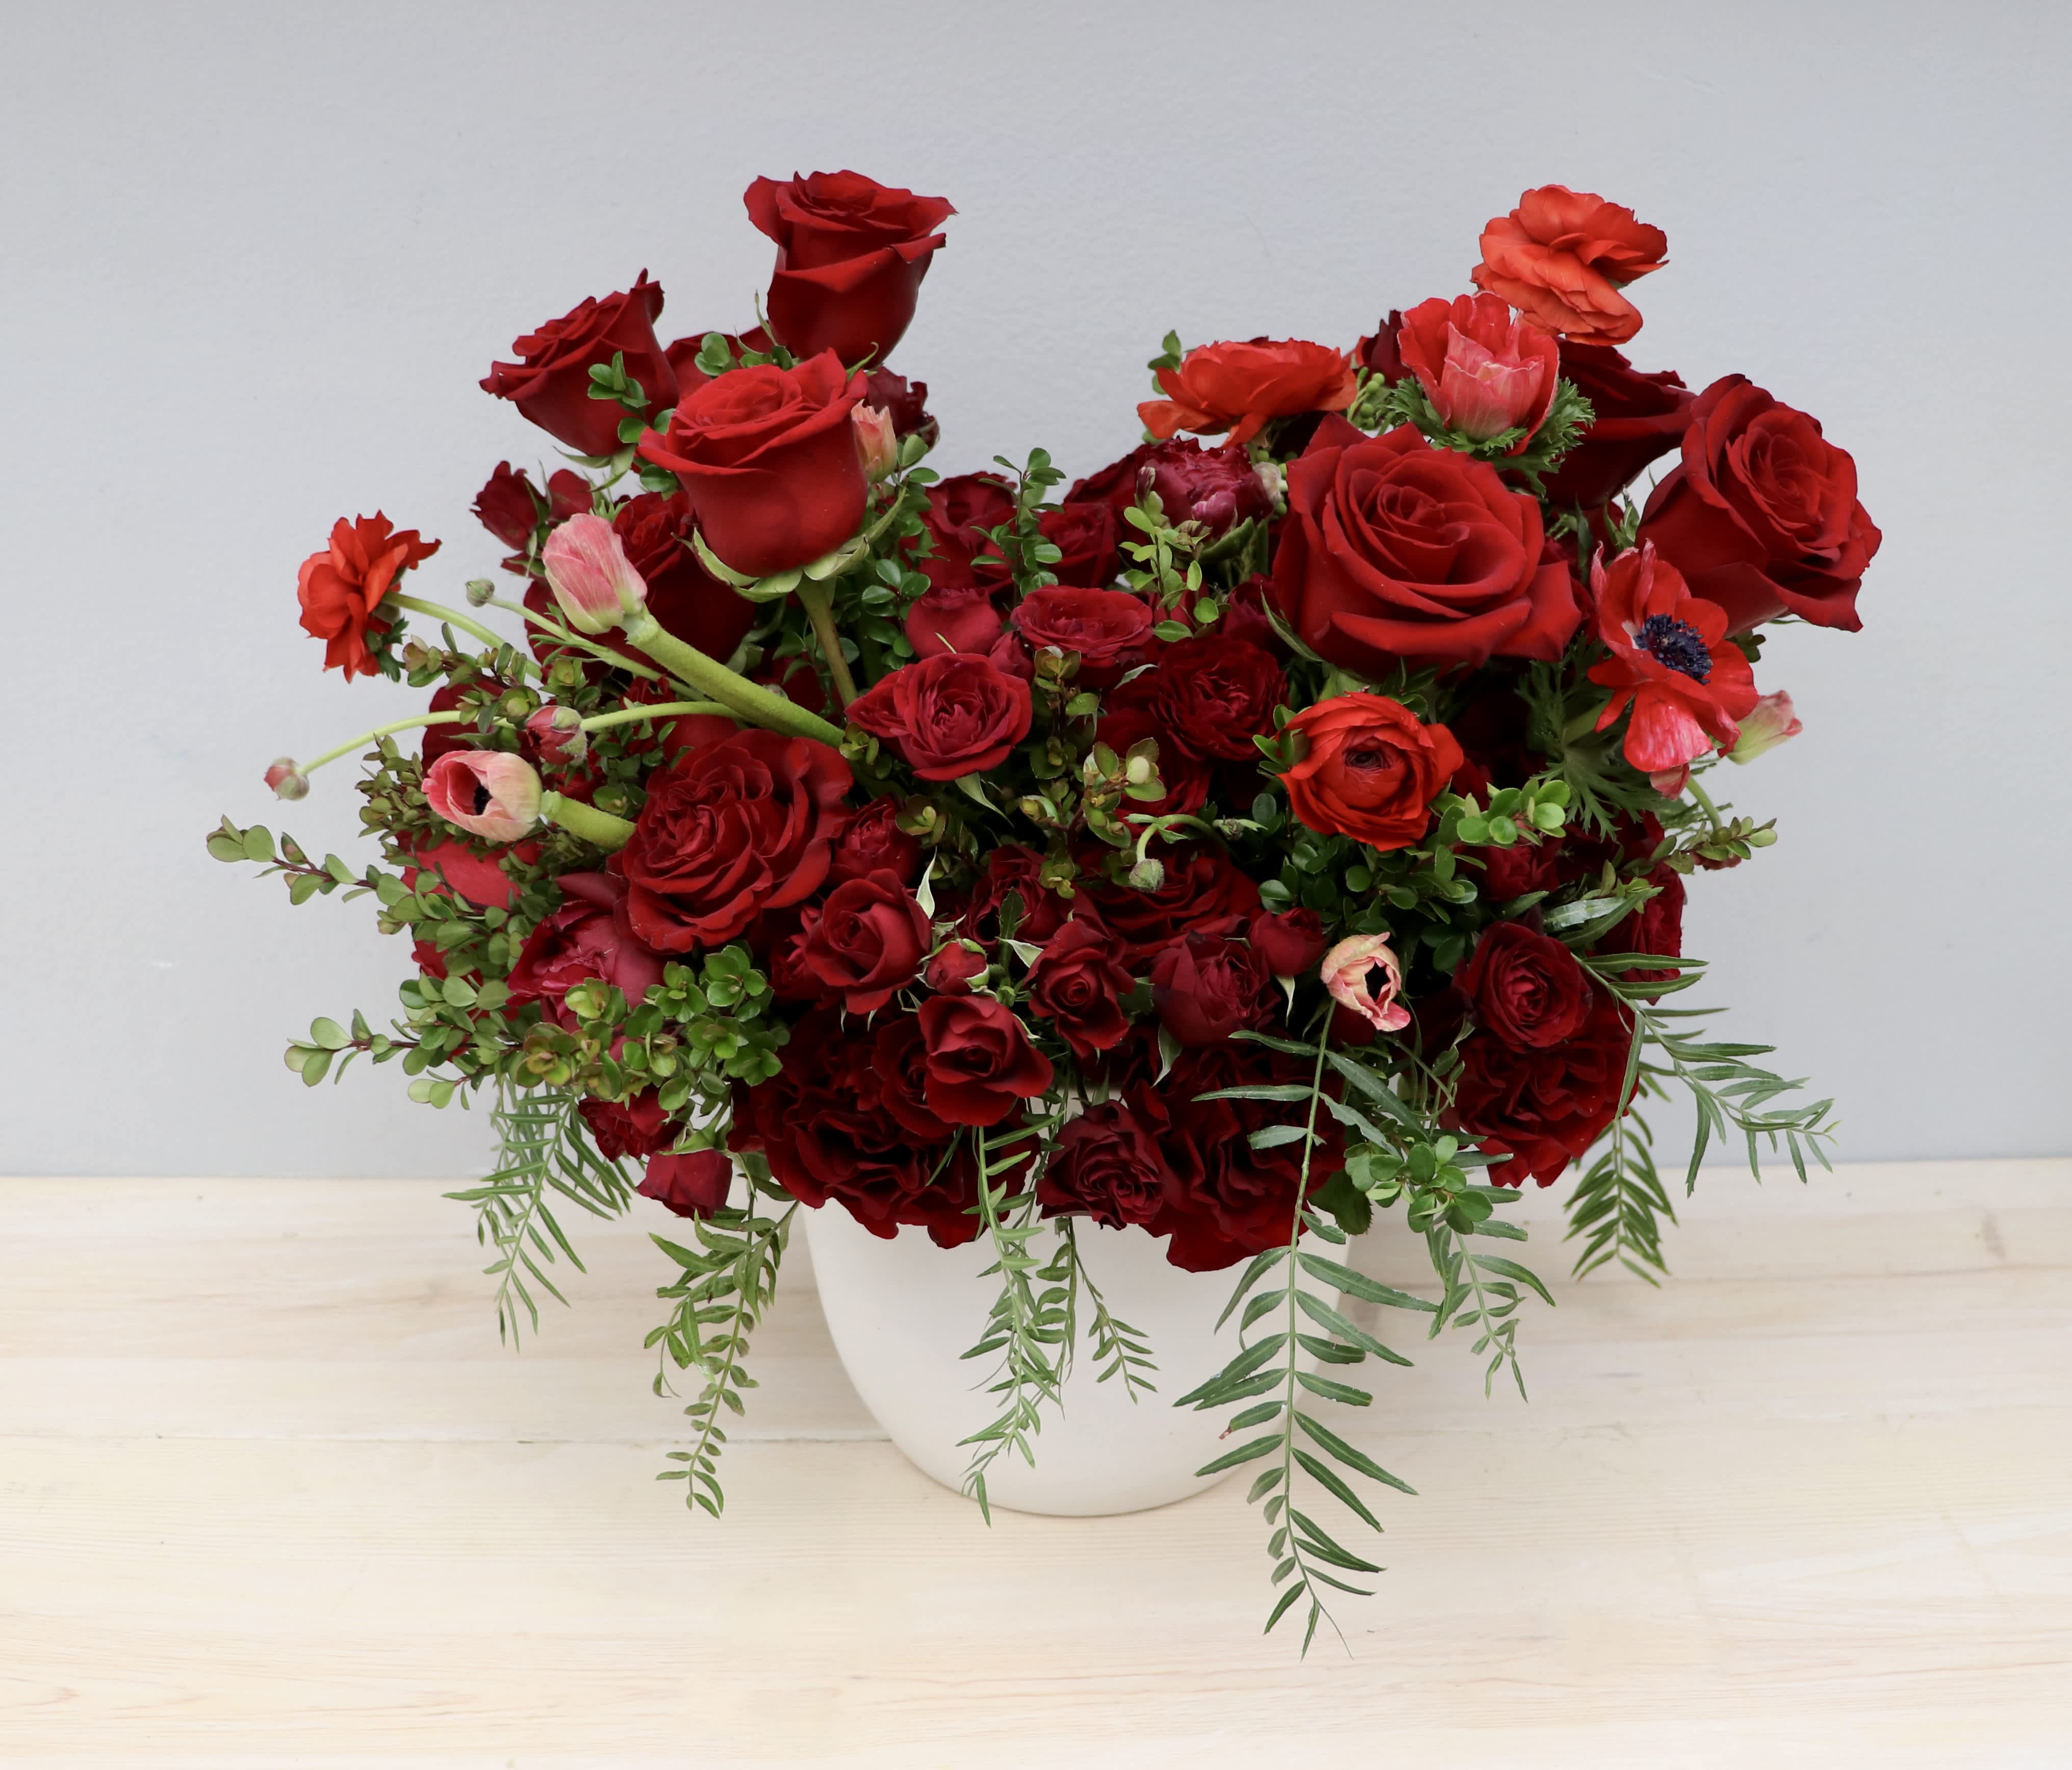 Crimson Serenade - My Glendale Florist  - This classic red rose arrangement is the sweetest reminder of your love for anyone in your life. Make sure to upgrade to deluxe or premium to send a larger arrangement with more florals!